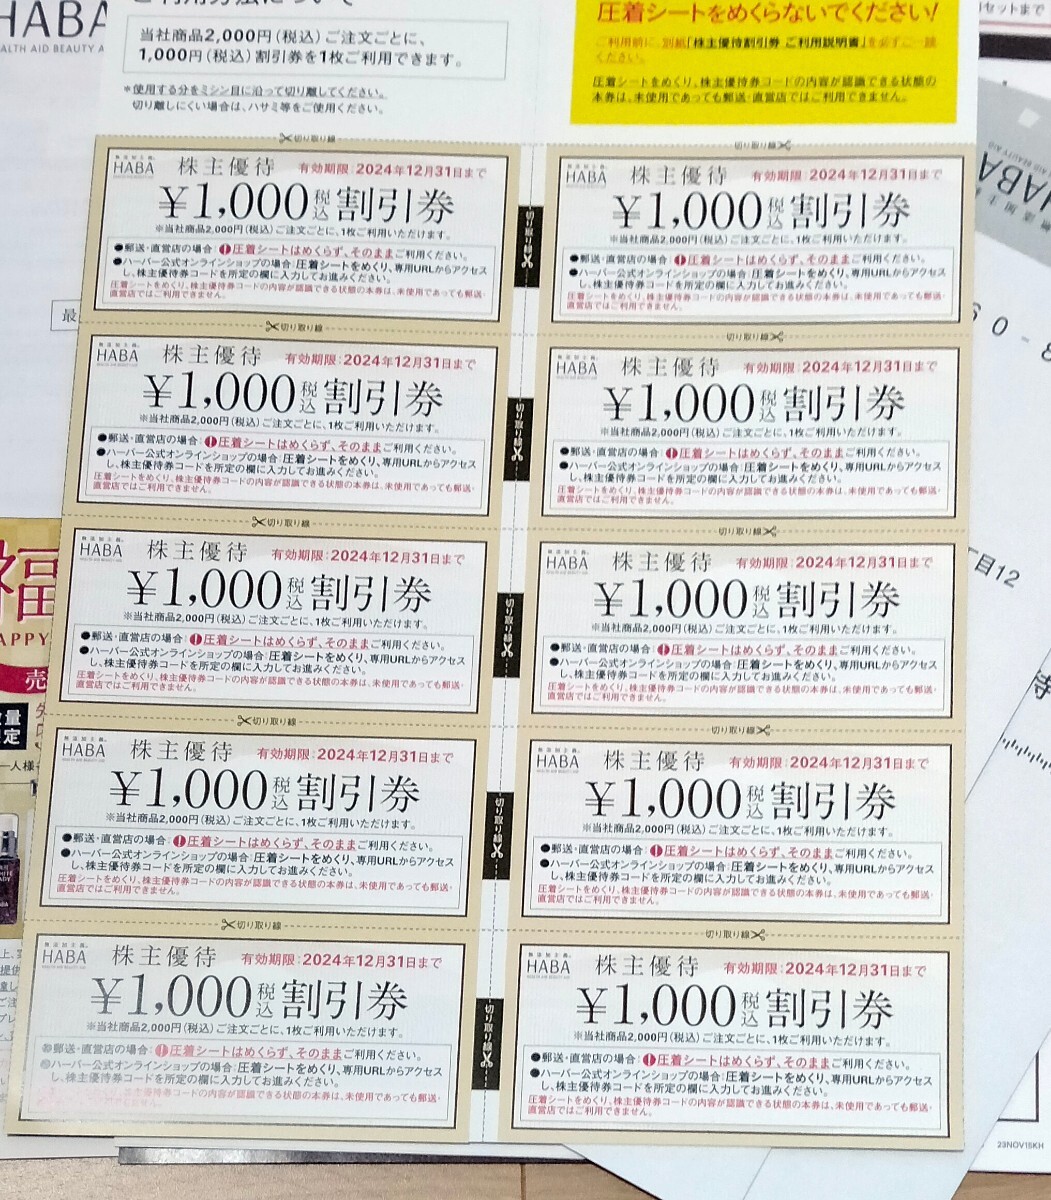  Haba research place stockholder complimentary ticket 1000 jpy discount ticket 10 pieces set 